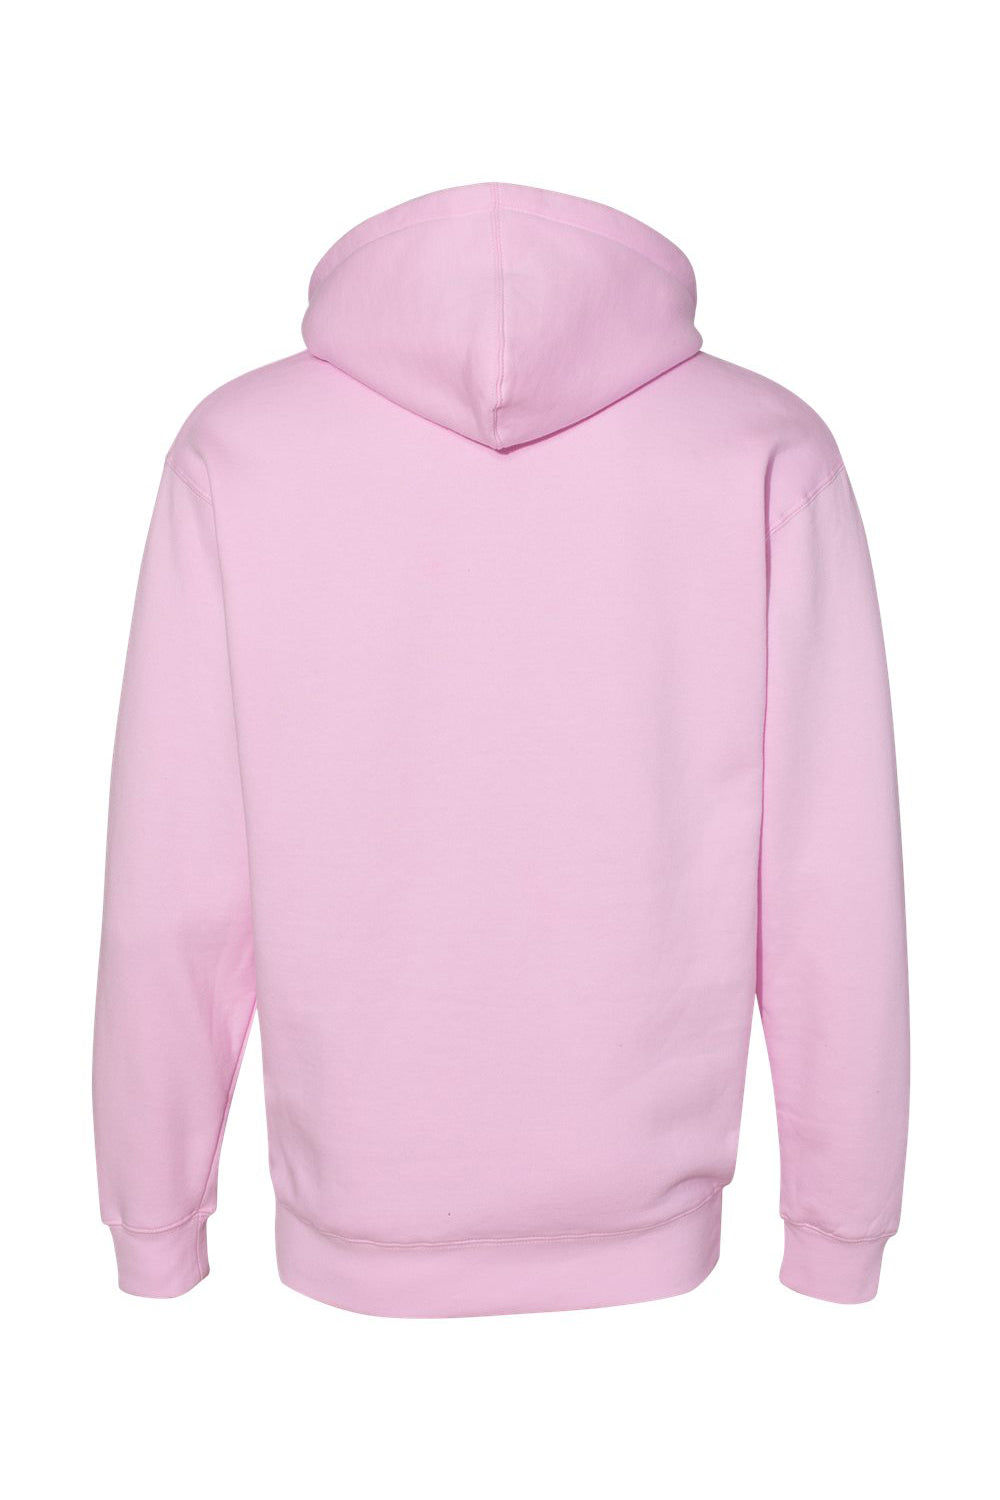 Independent Trading Co. IND4000 Mens Hooded Sweatshirt Hoodie Light Pink Flat Back